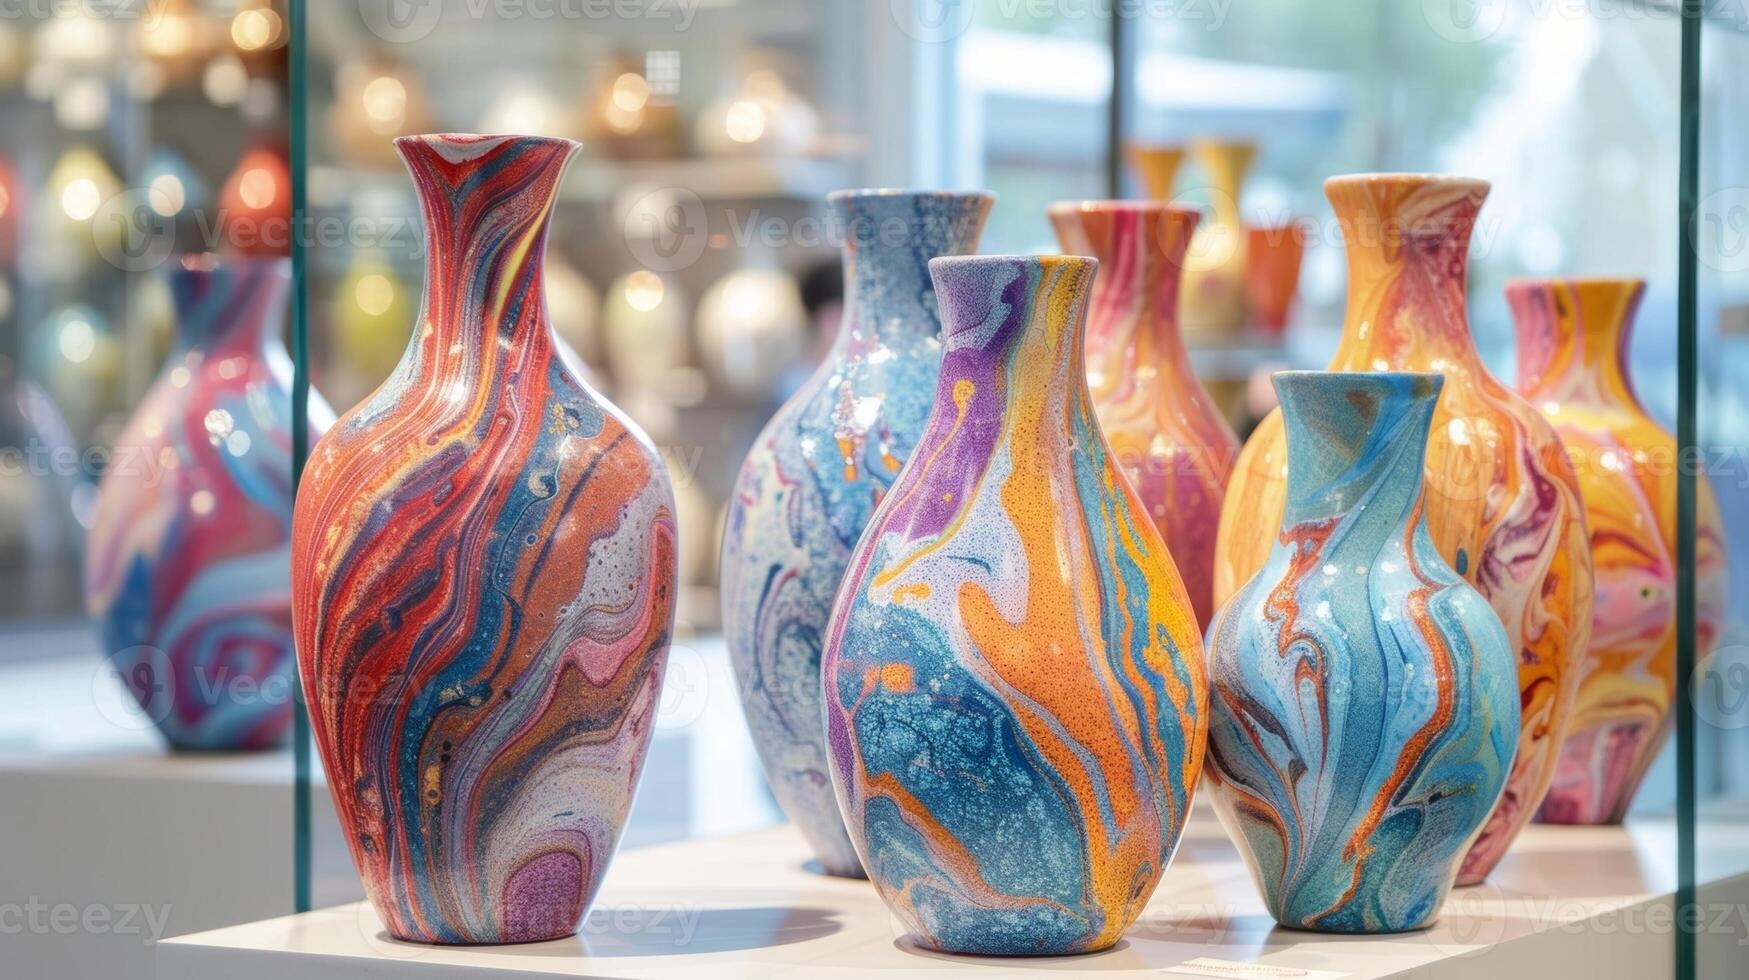 A display of ceramic vases painted with a unique marbling technique creating a stunning abstract design. photo